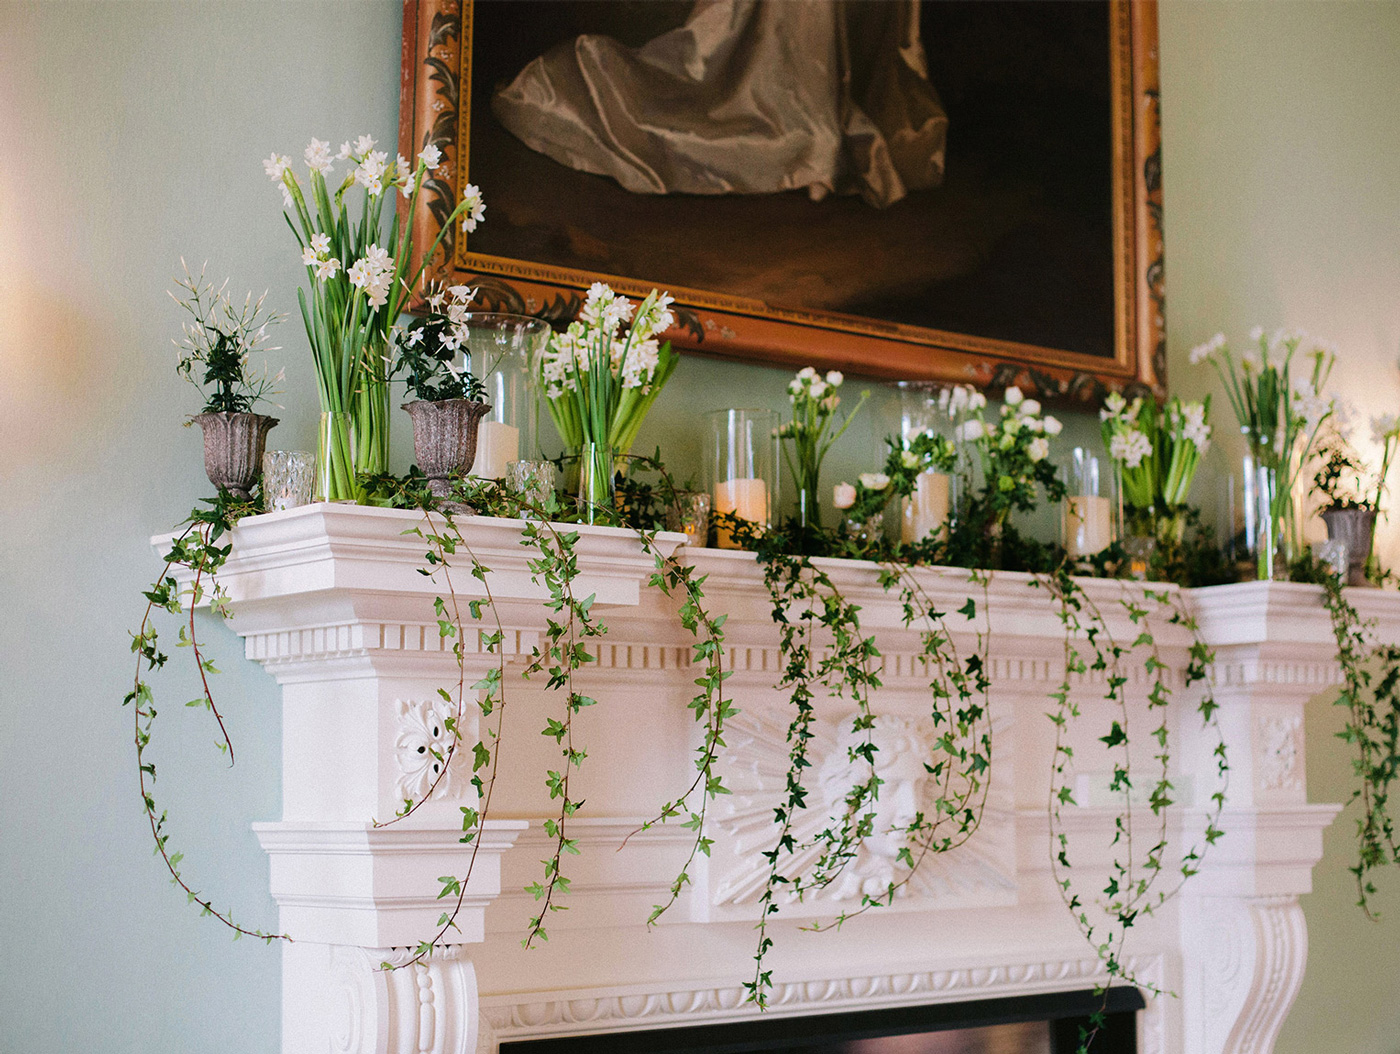 Floral decor on fireplace for wedding